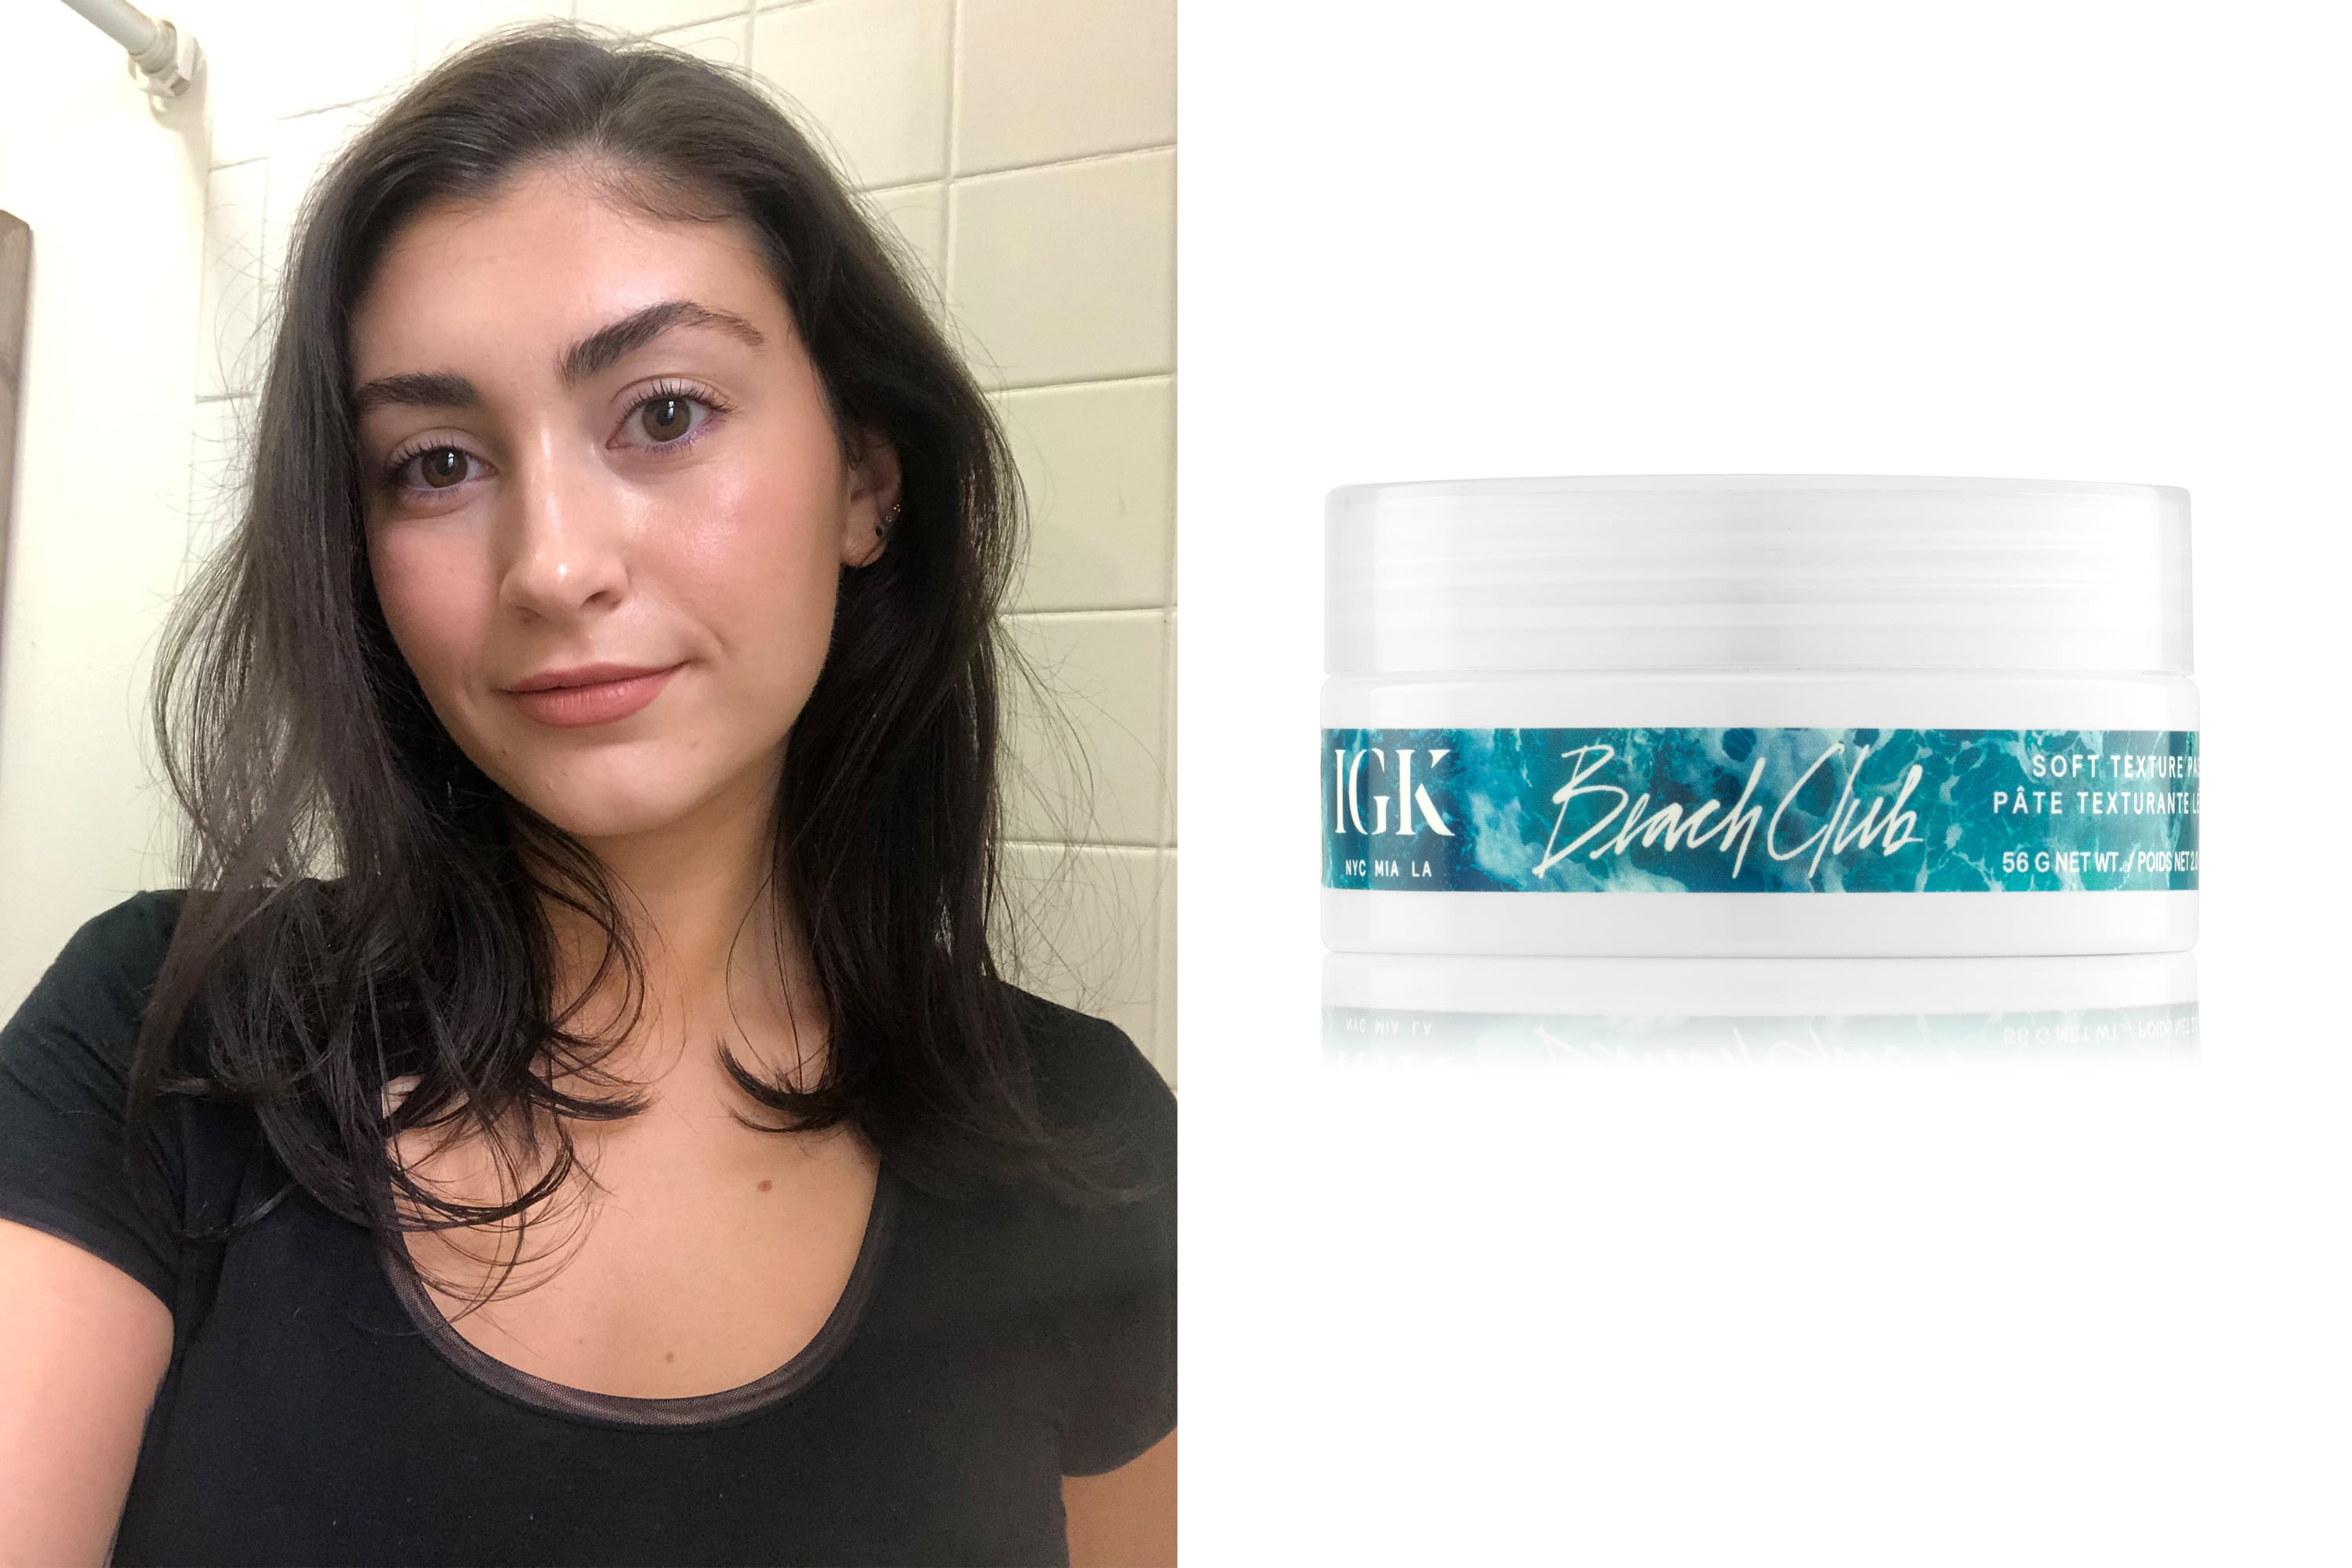 IGK BEACH CLUB, PRODUCT REVIEW, VOLUME, TEXTURE